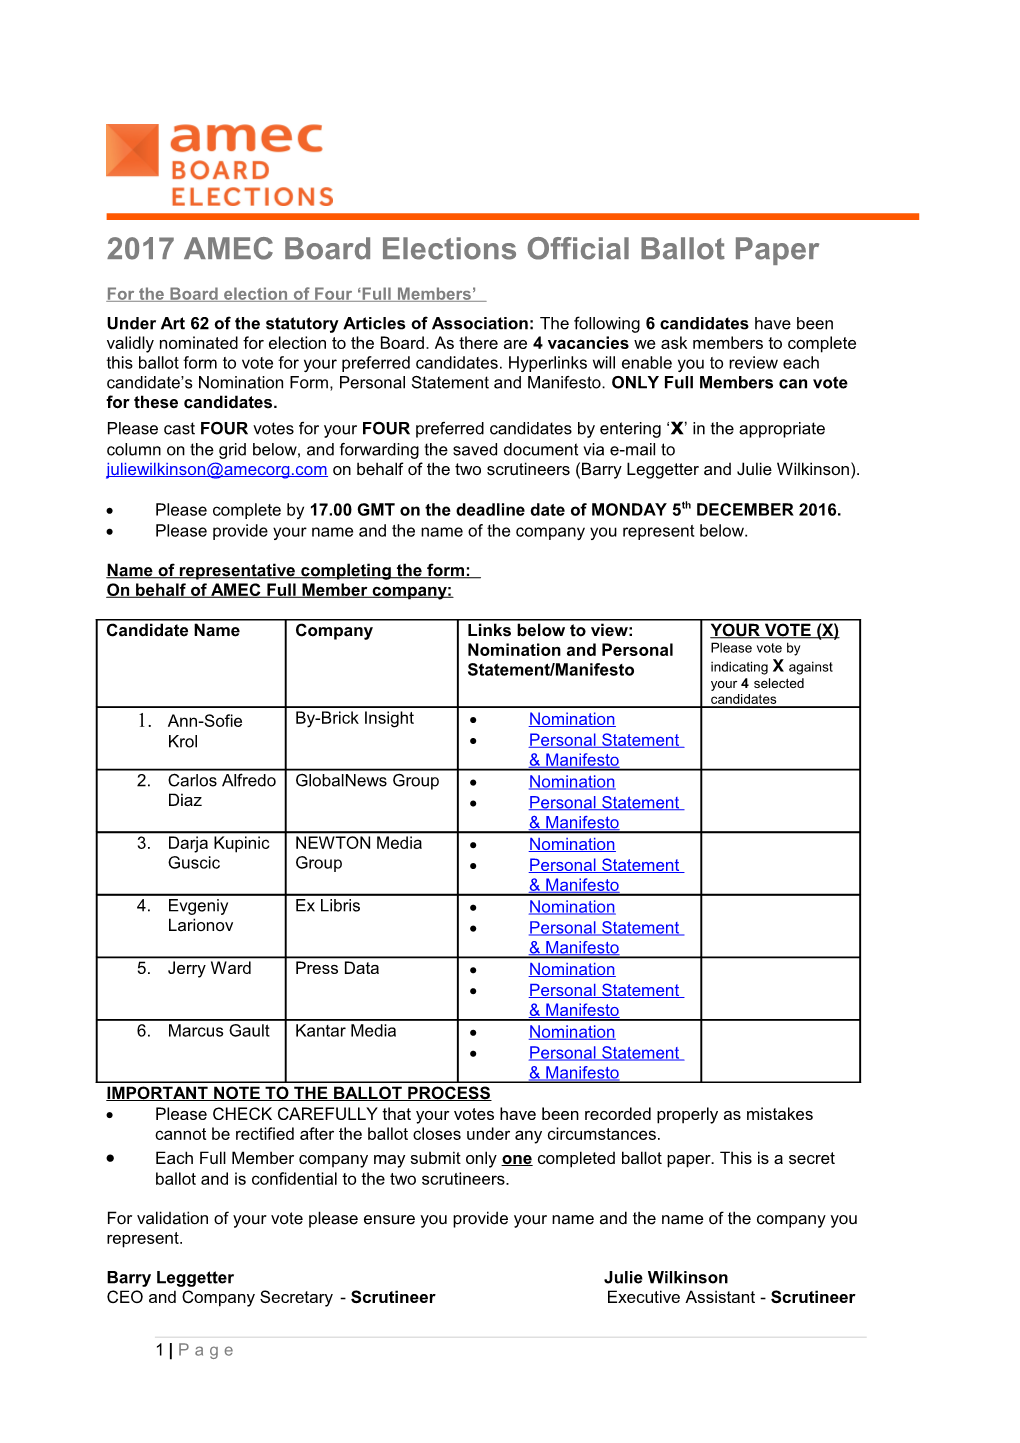 For the Board Election of Four Full Members